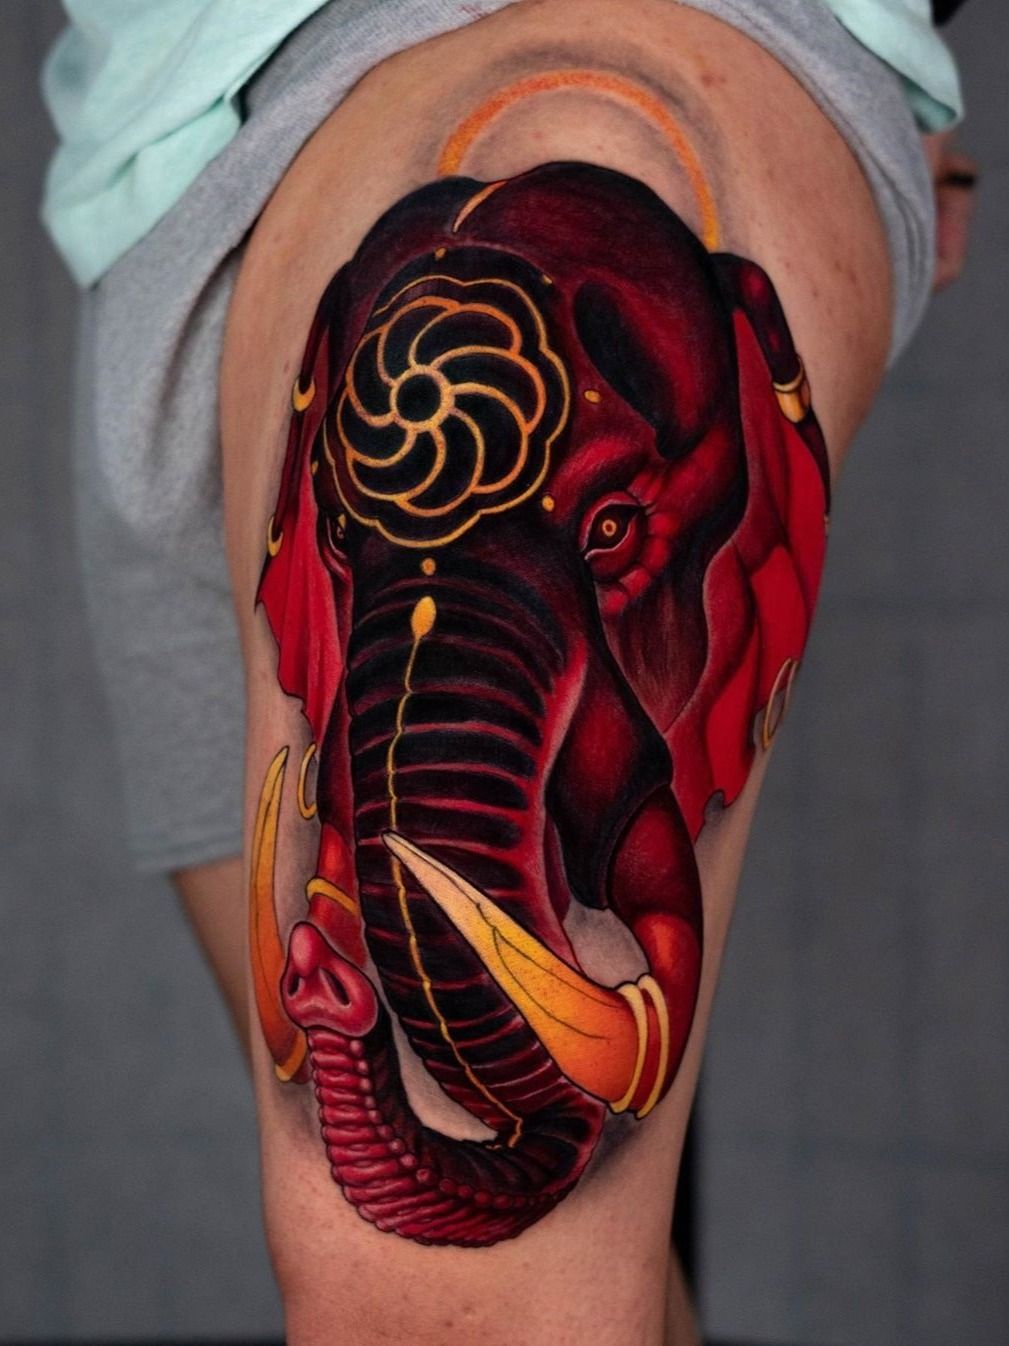 Elephant Knee Tattoo Photos Download The BEST Free Elephant Knee Tattoo  Stock Photos  HD Images